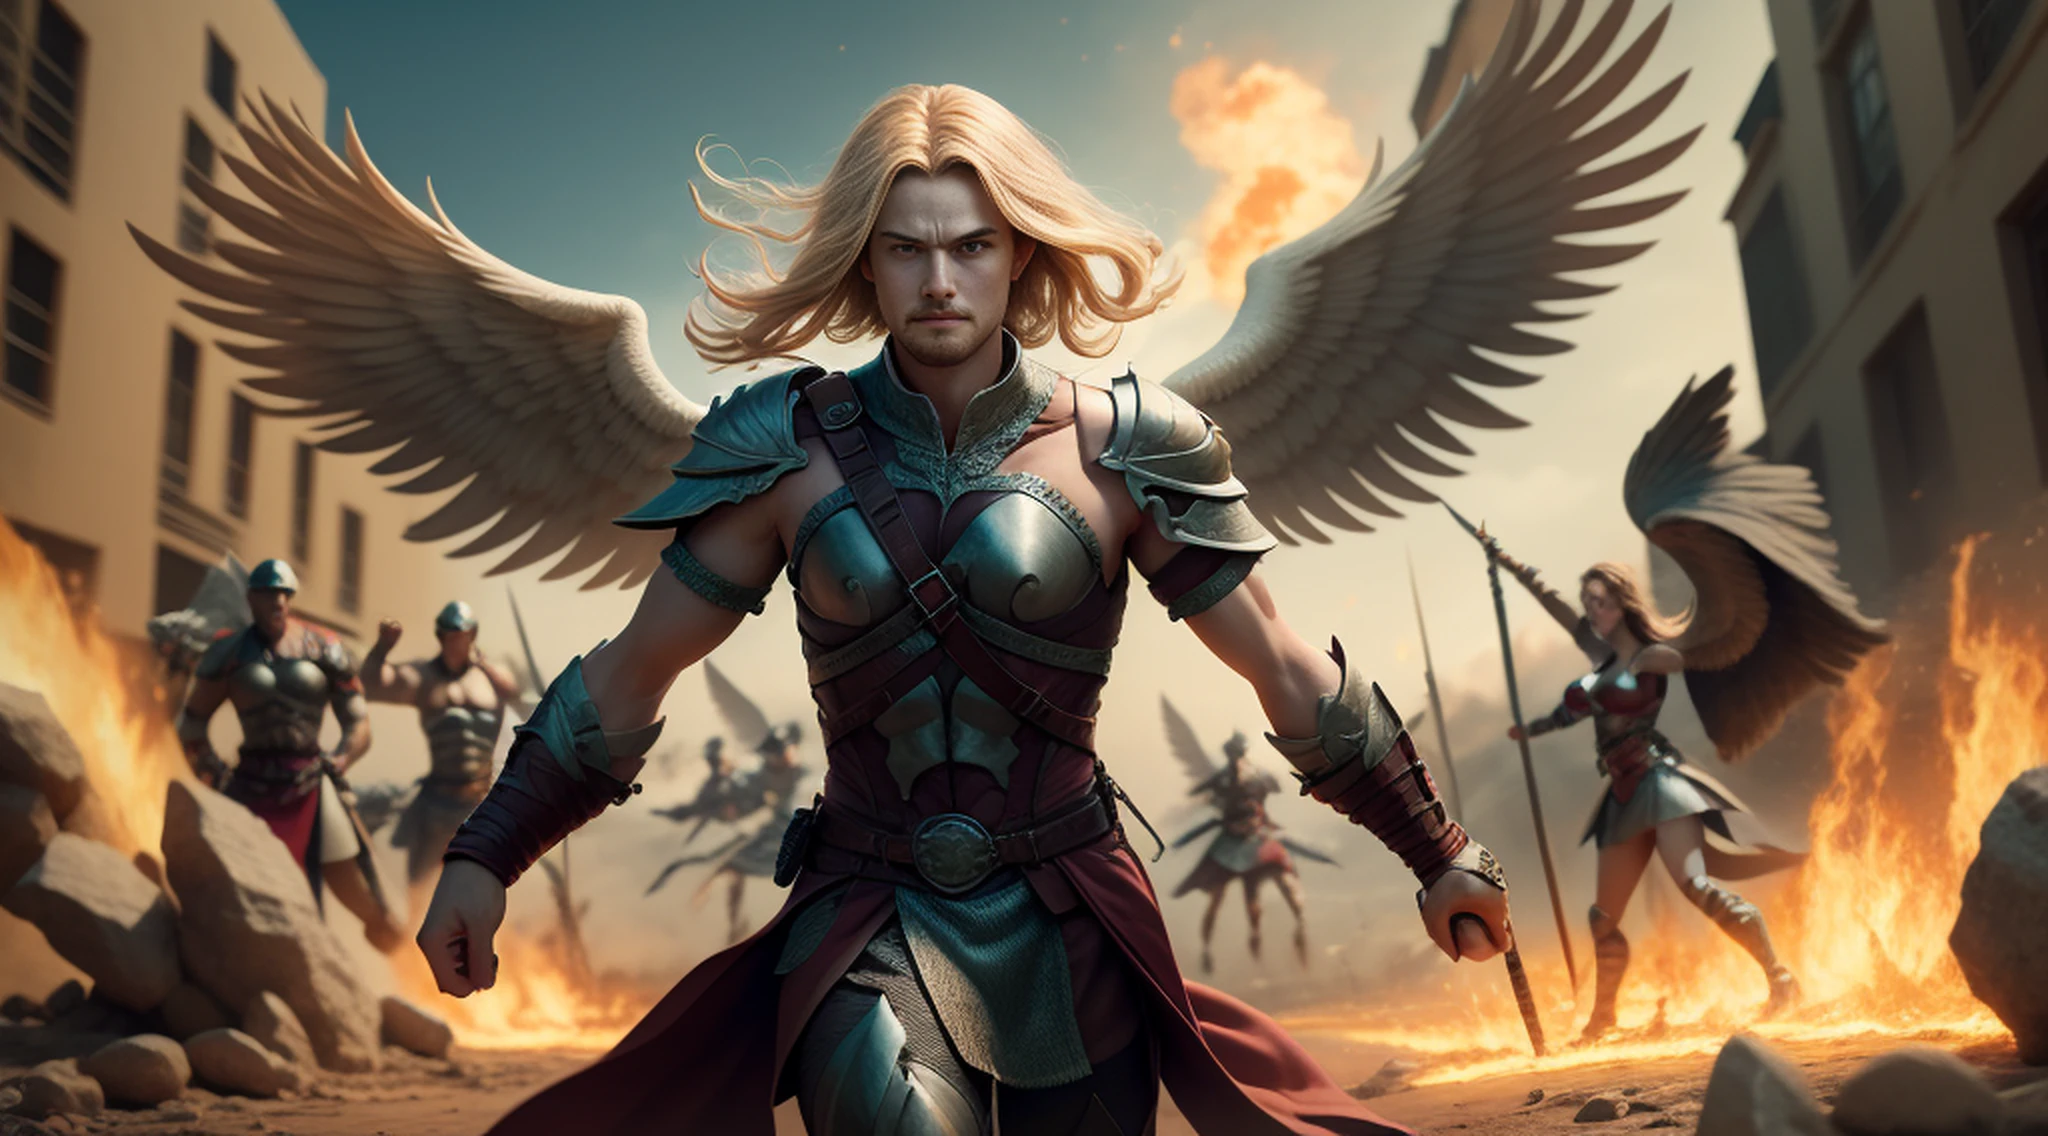 Create an image of an archangel with four large wings who is leading an army of angels to fight the forces of evil in an epic battle. He has a flaming sword in one hand and a shield in the other, and his face is determined and courageous. UHD, high details, super detail, best quality, 8k